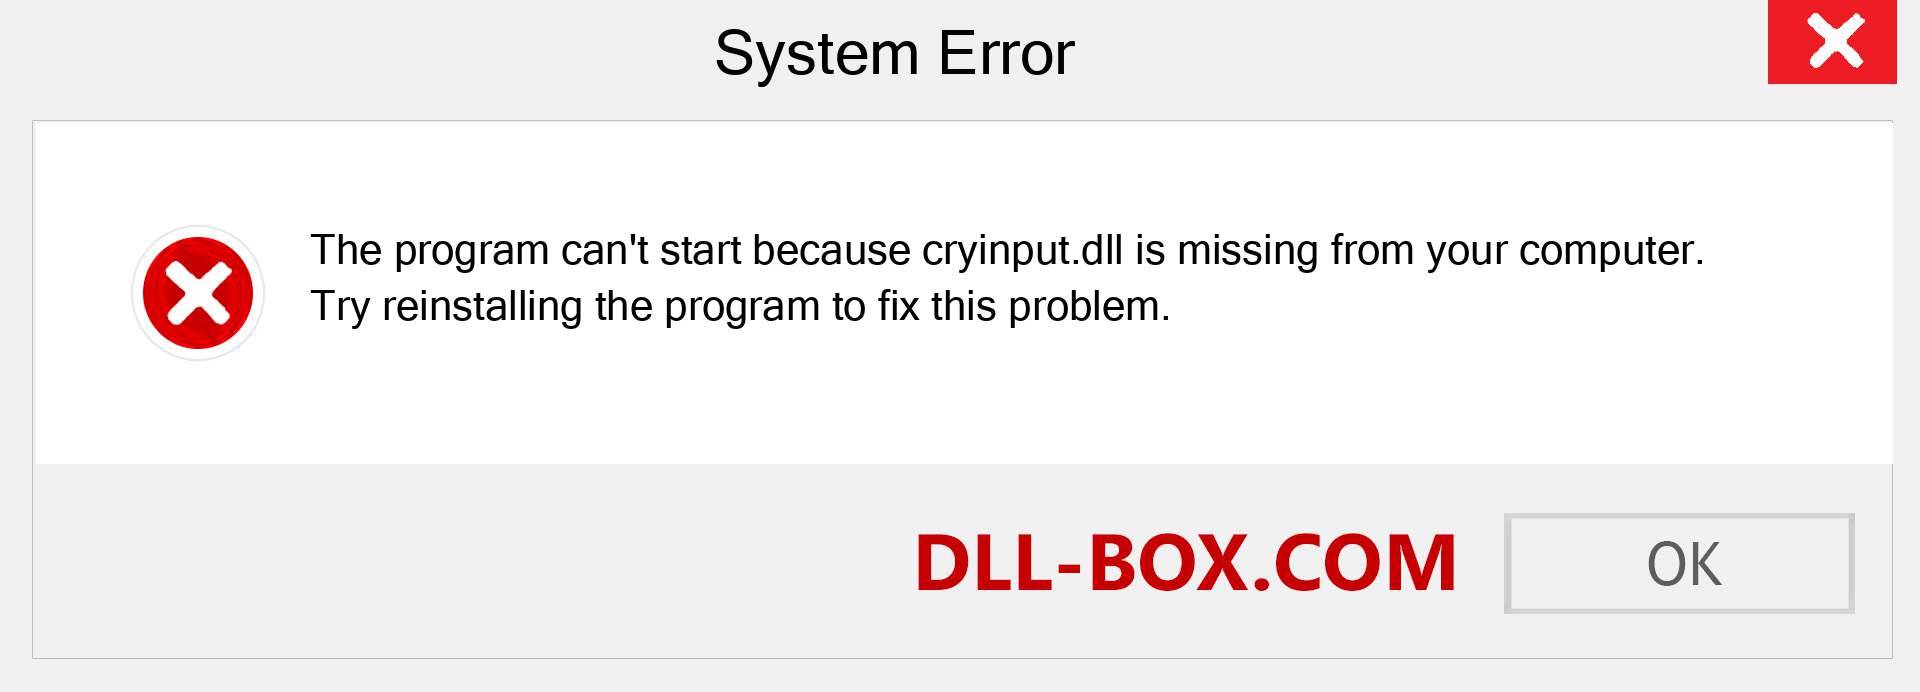  cryinput.dll file is missing?. Download for Windows 7, 8, 10 - Fix  cryinput dll Missing Error on Windows, photos, images